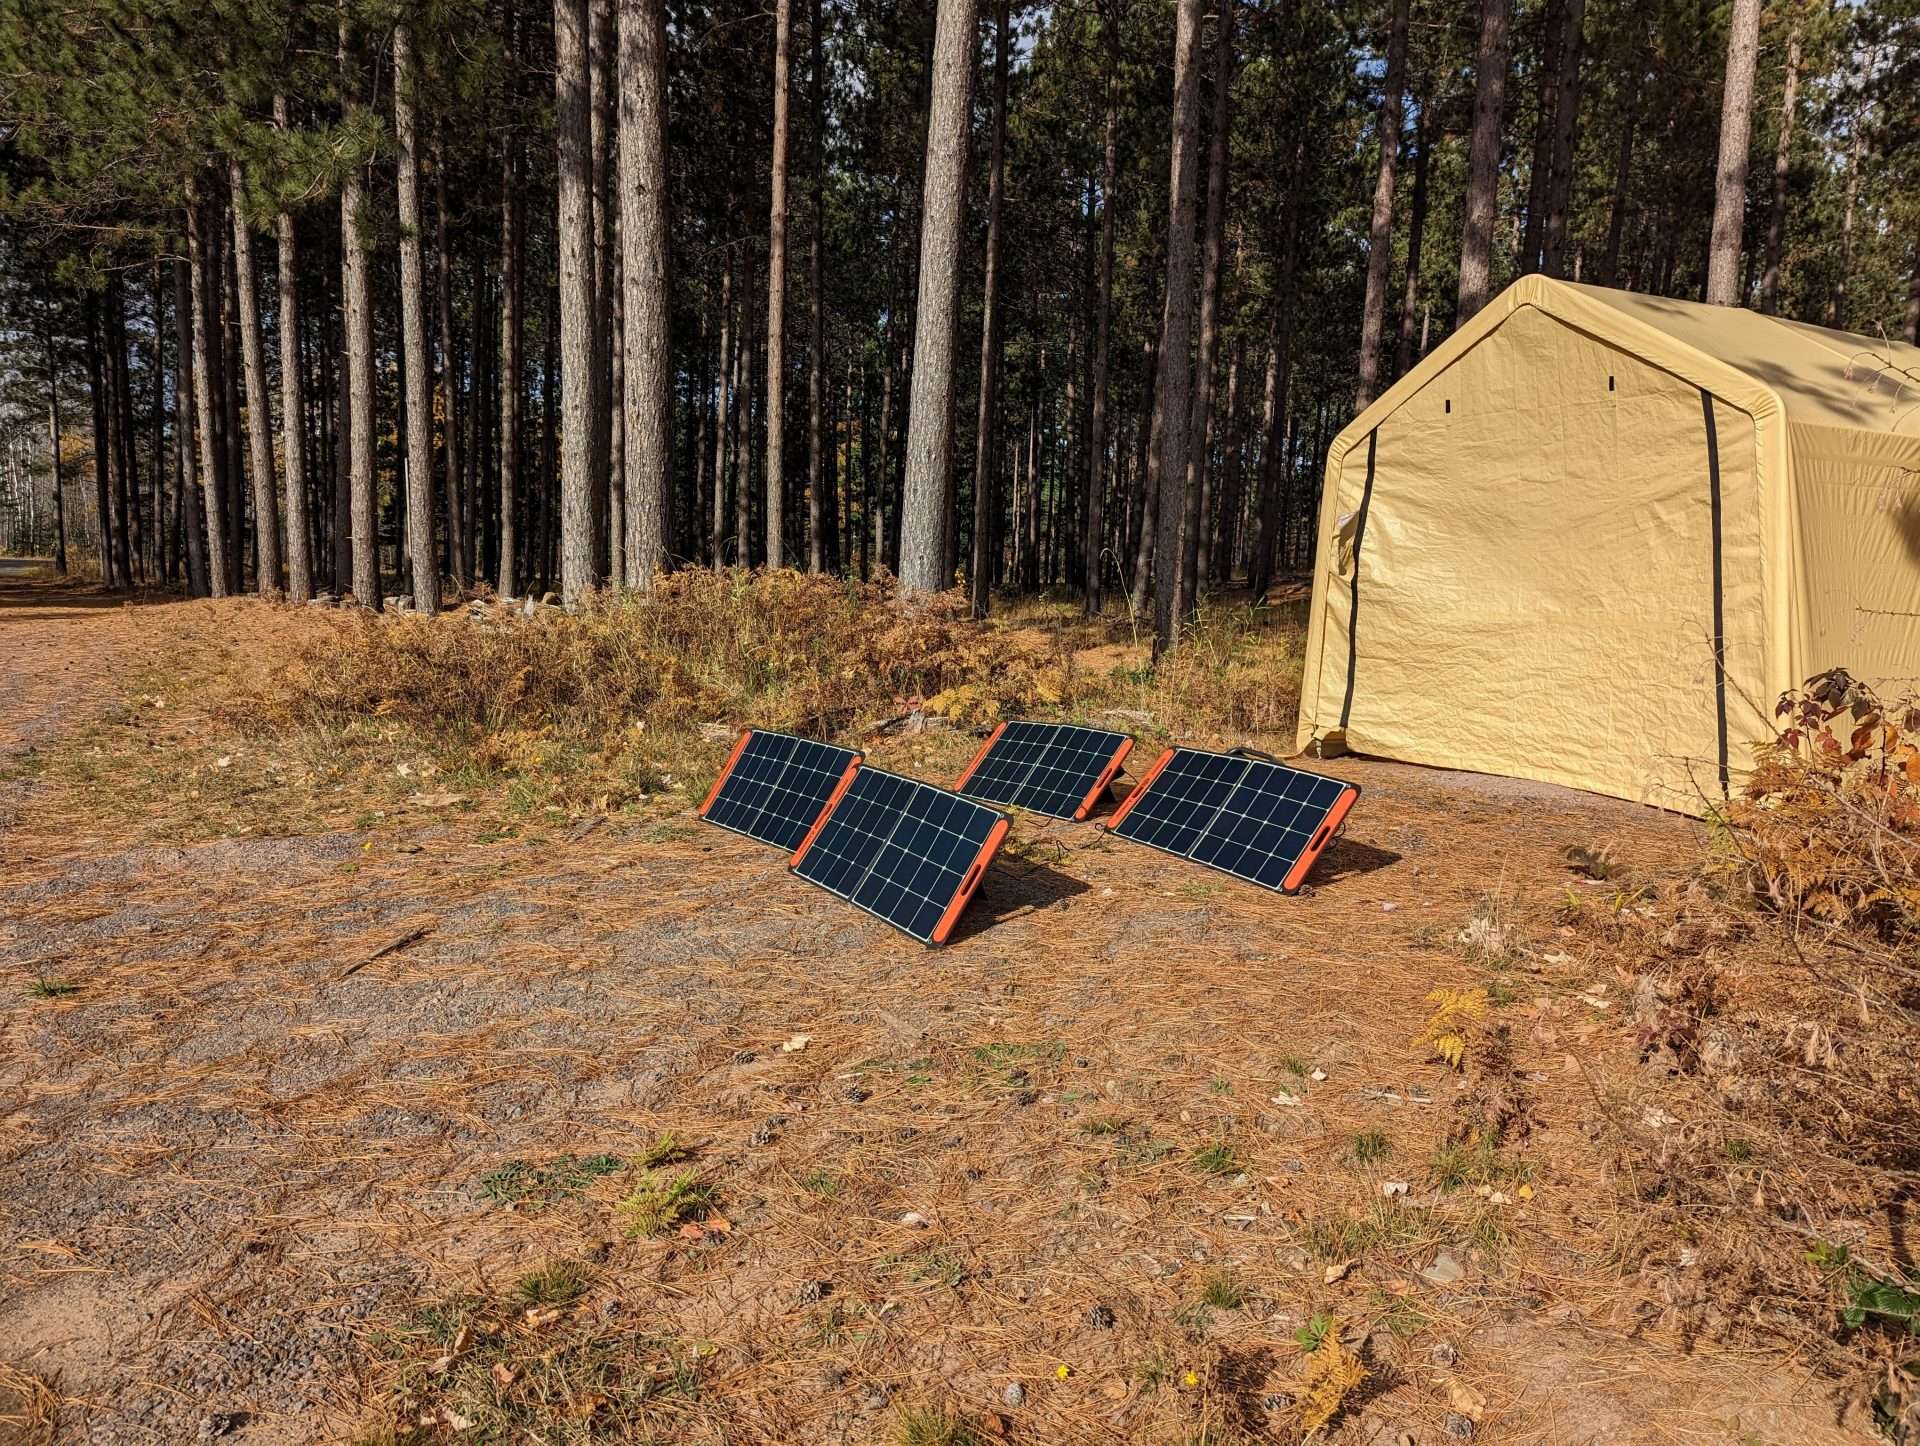 Harbor Freight Portable Garage installed at campsite with solar panels